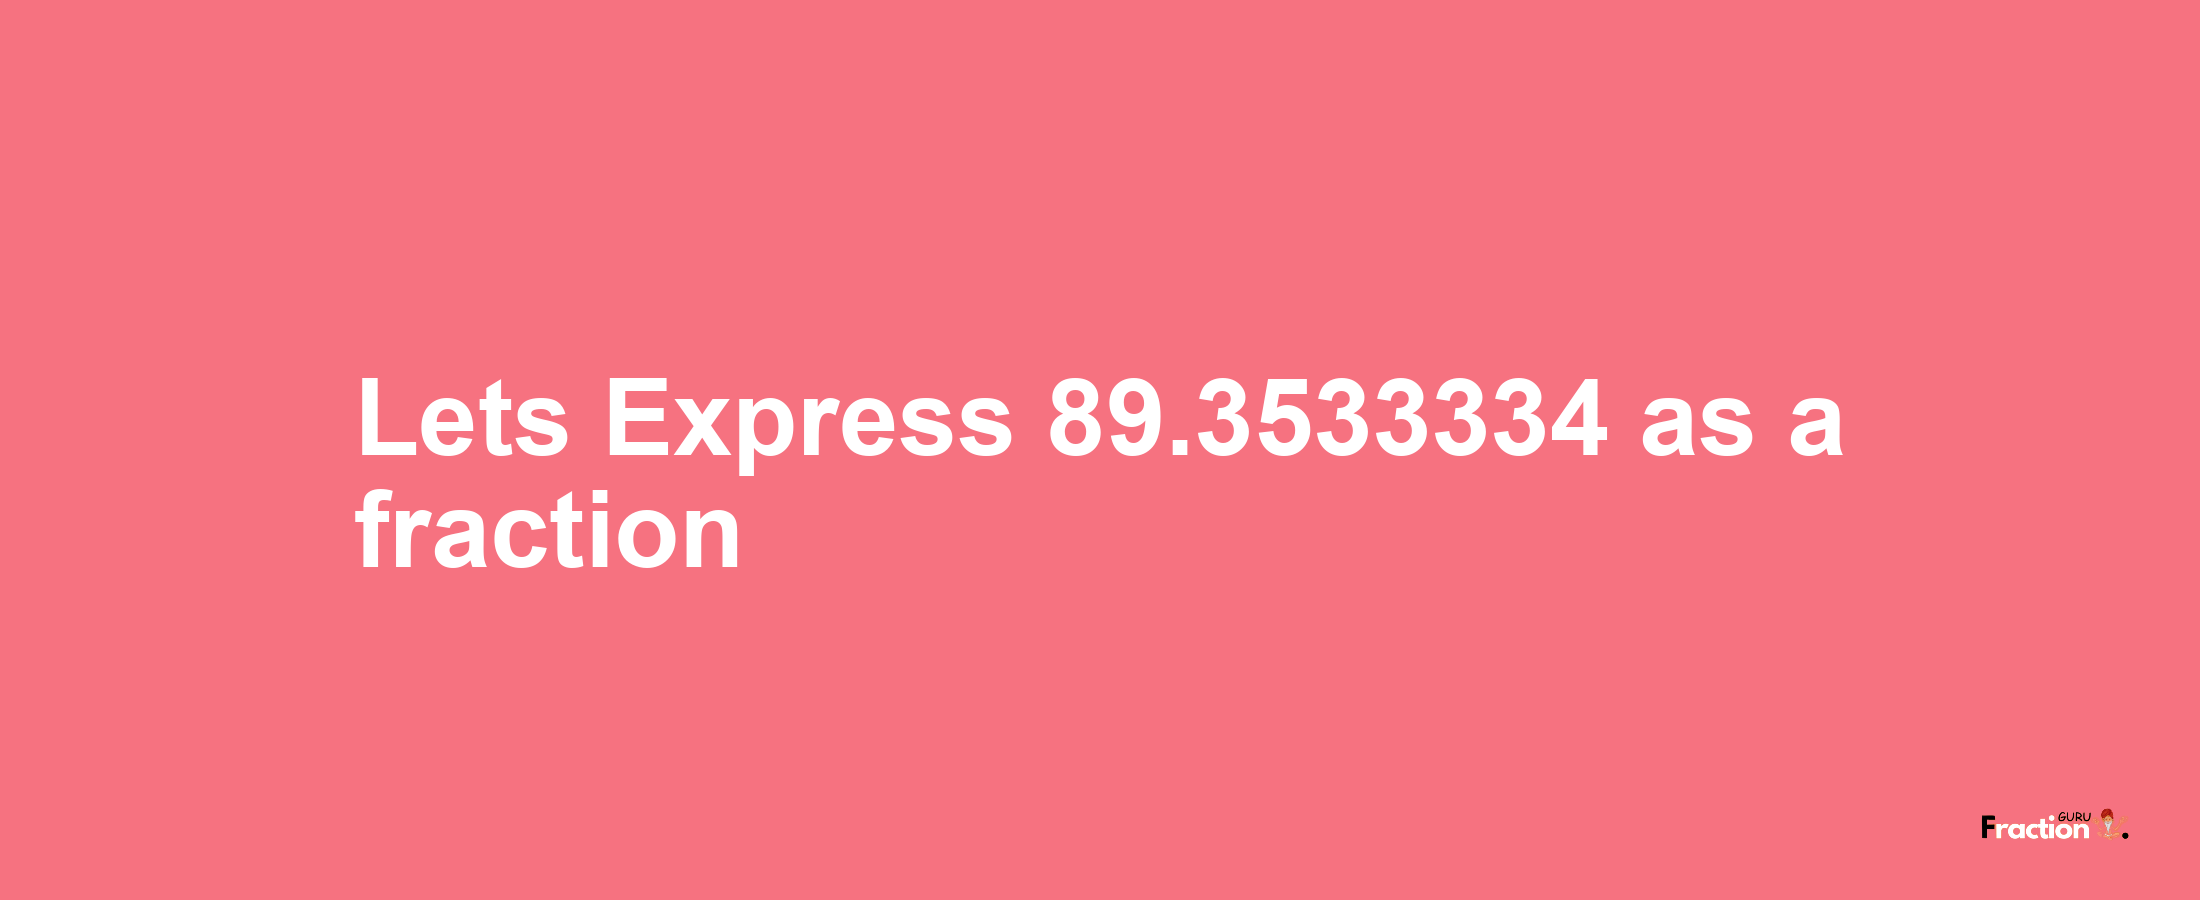 Lets Express 89.3533334 as afraction